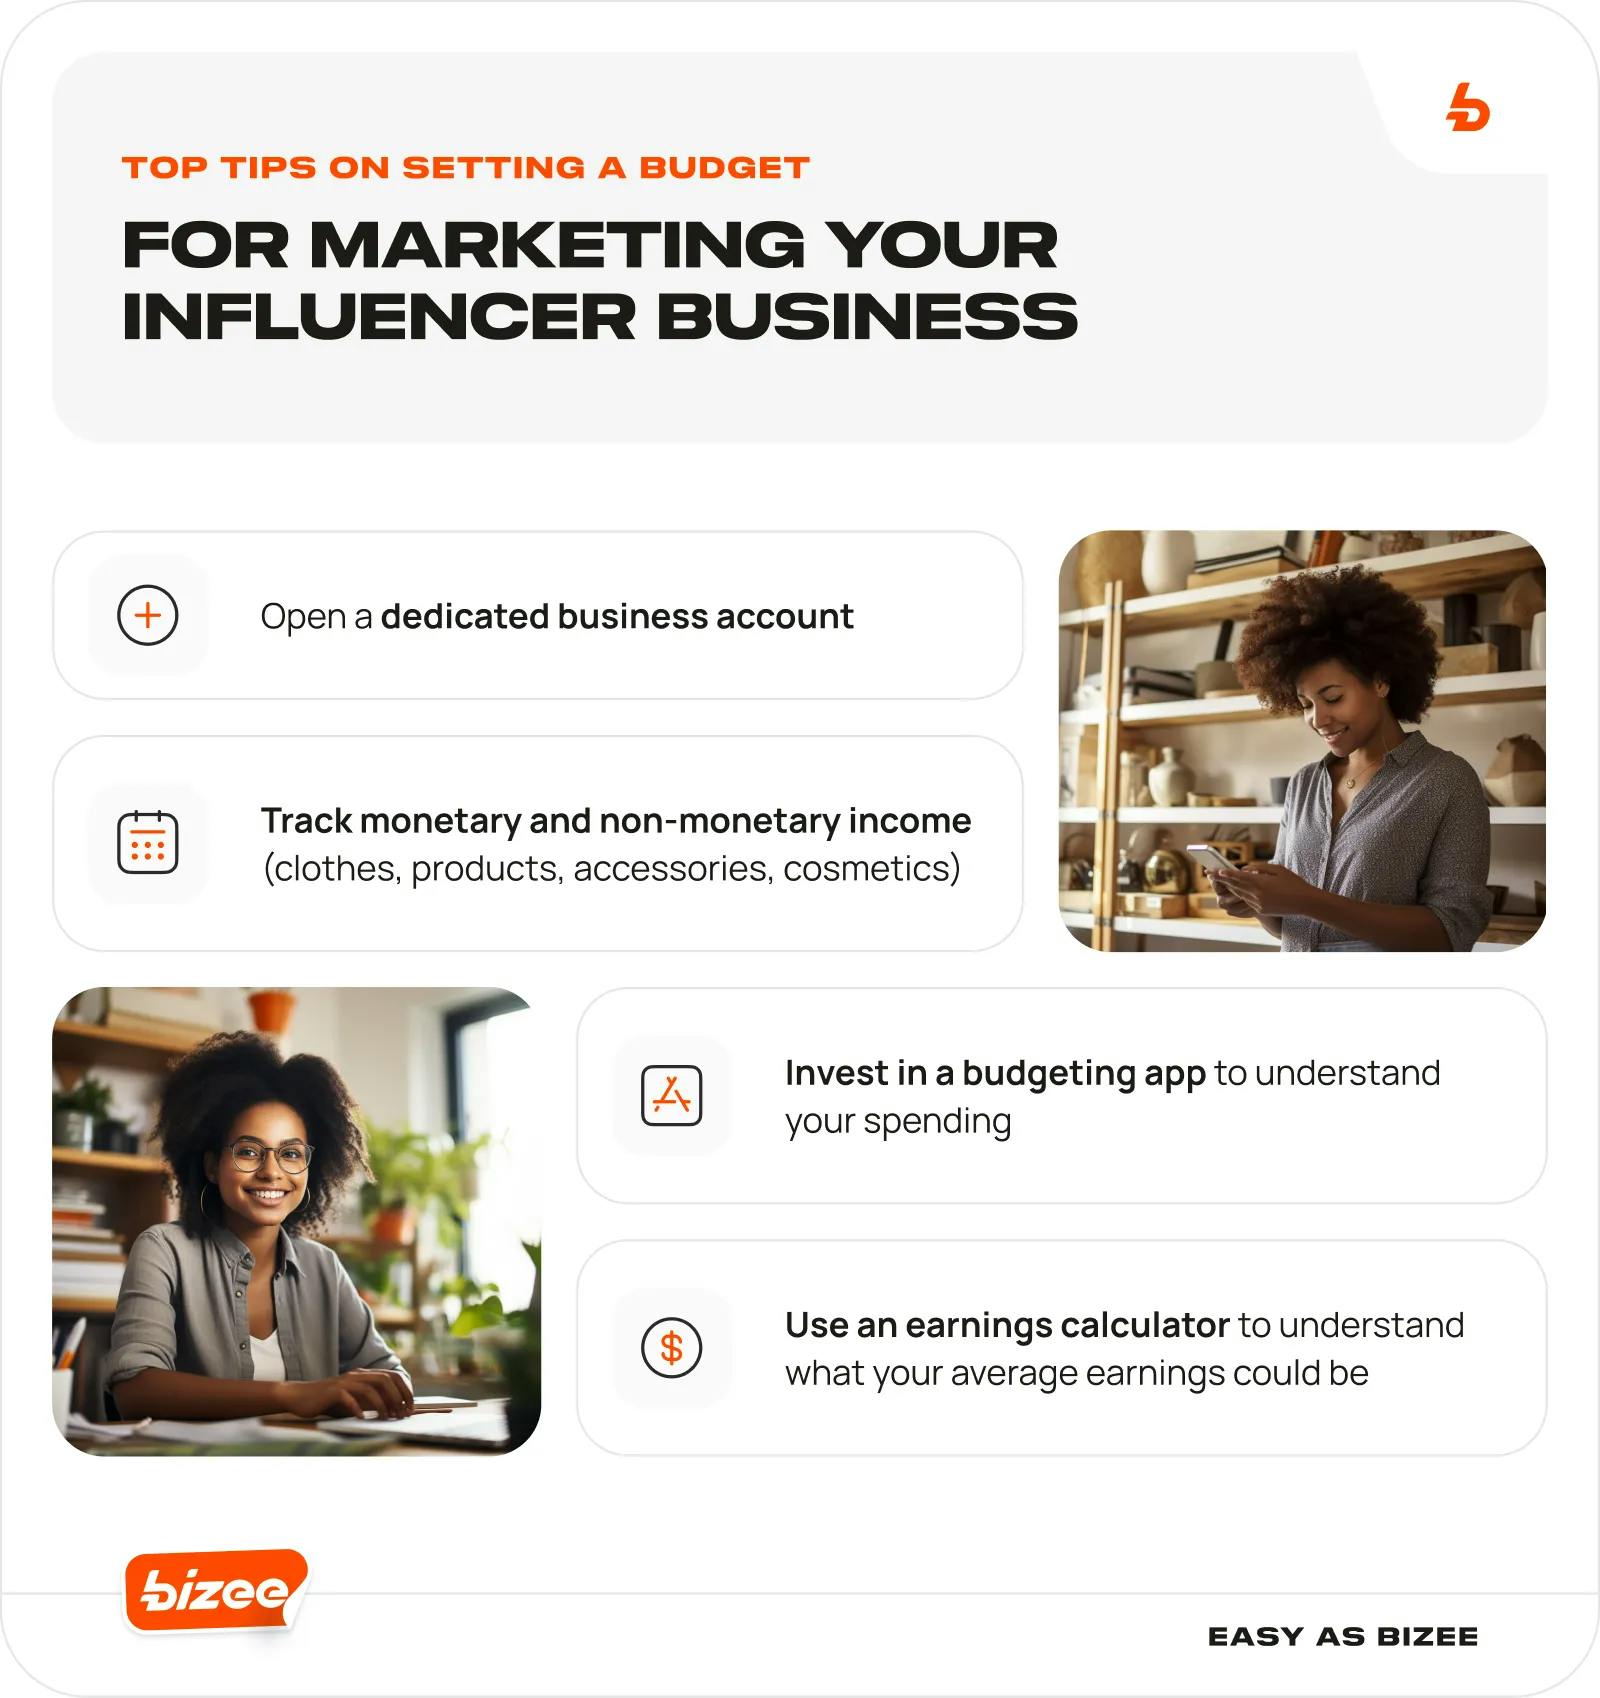 Top Tips on Setting a Budget for Marketing Your Influencer Business